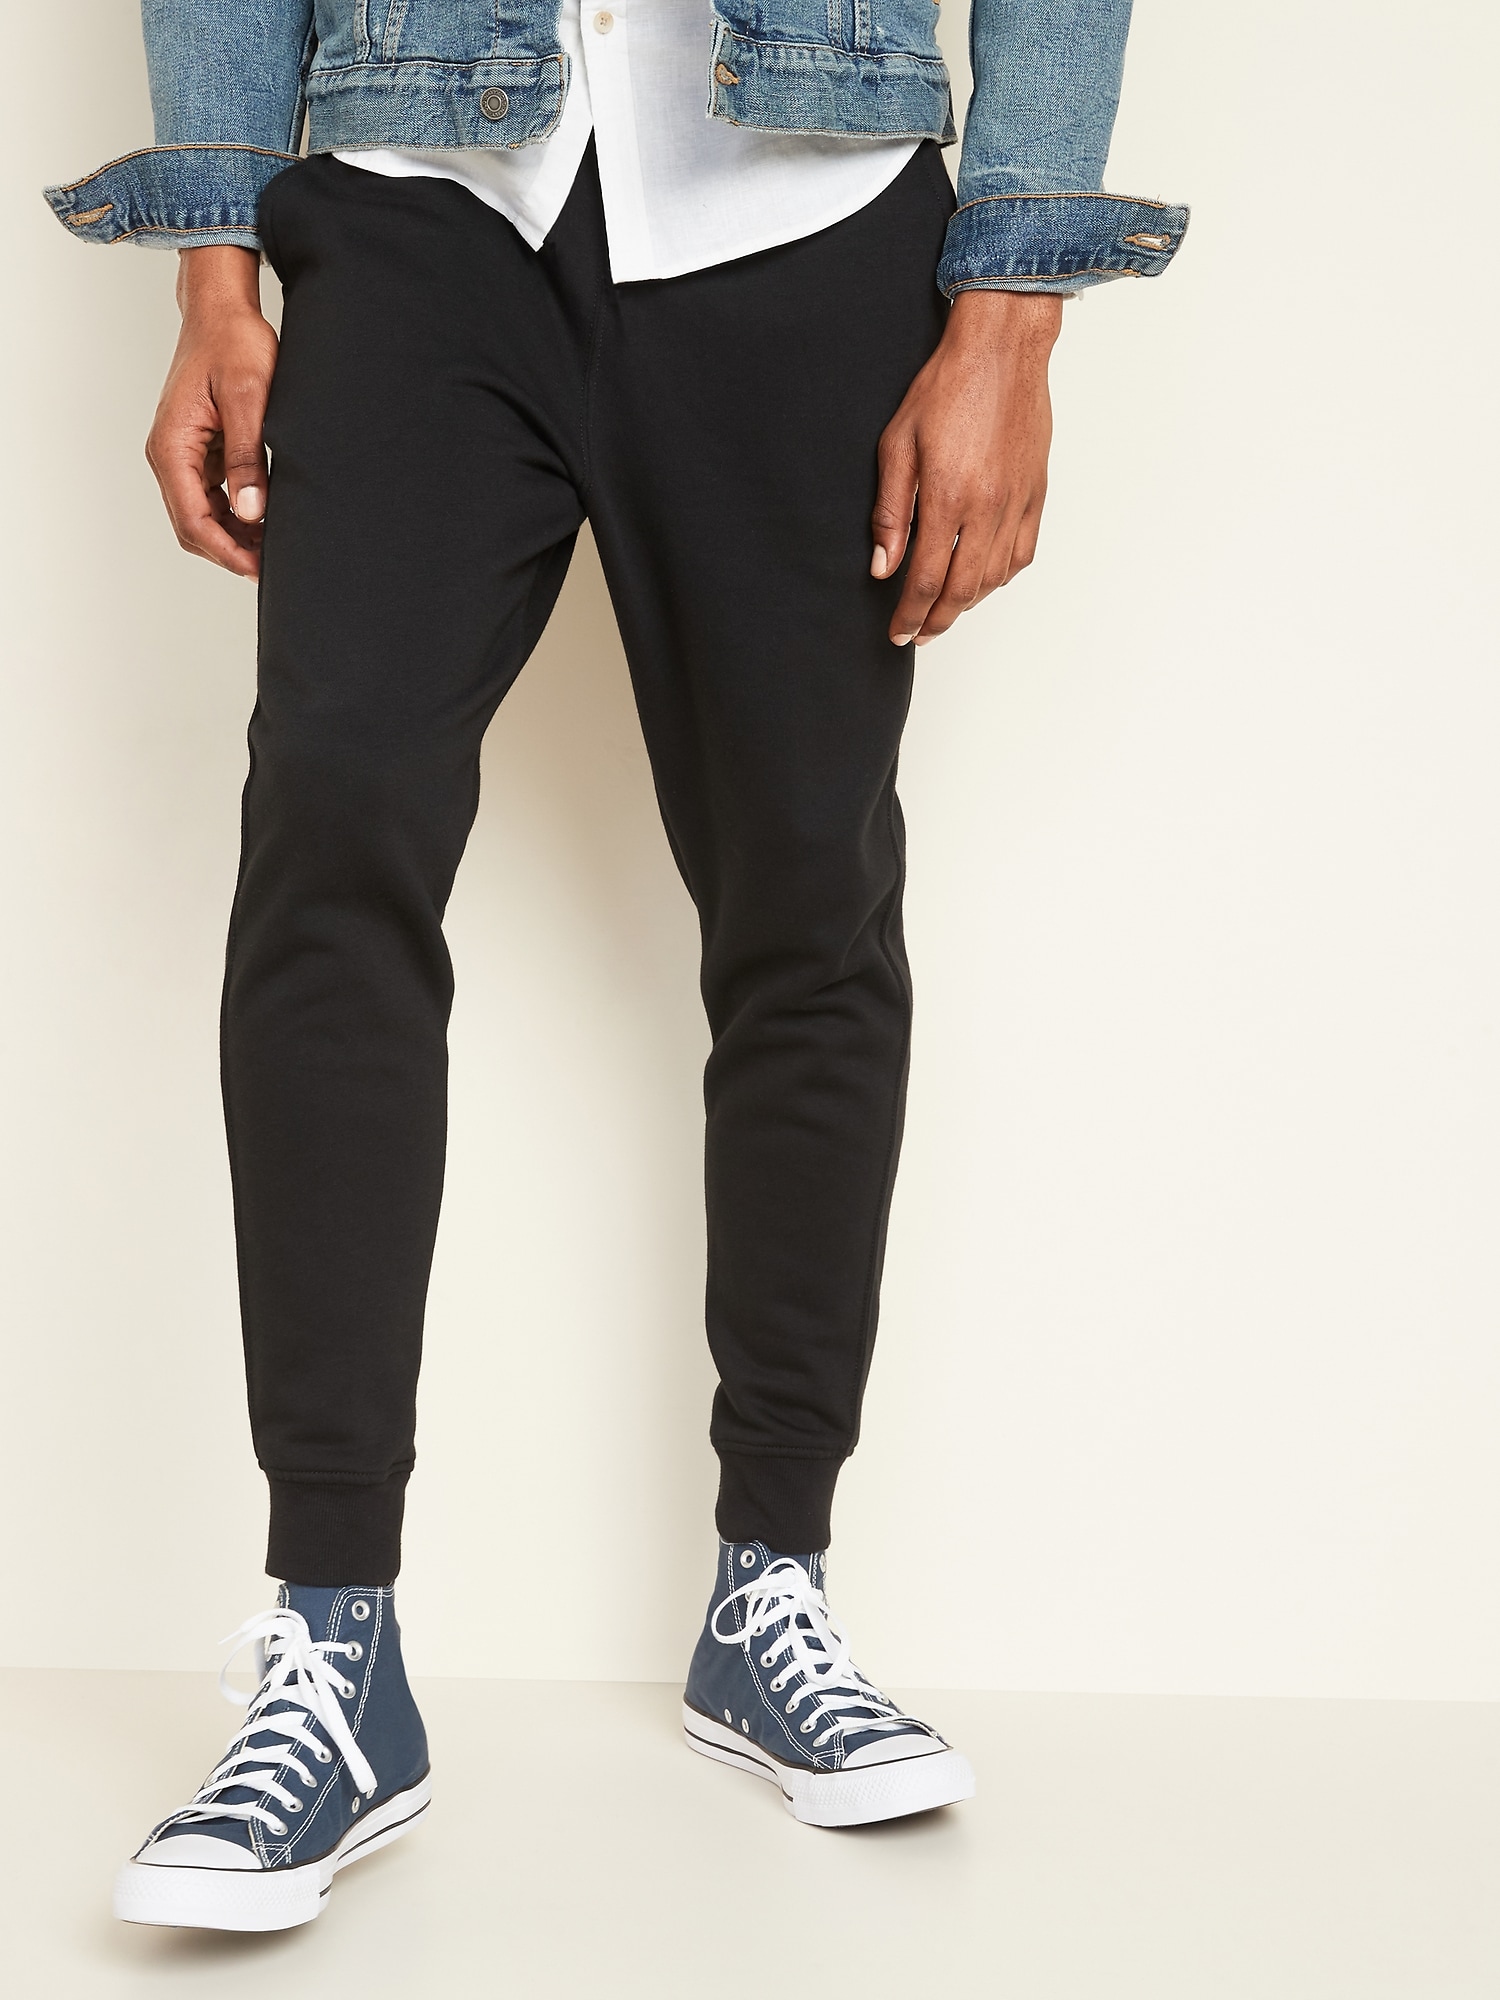 Old Navy Tapered Street Jogger Sweatpants for Men | Plaza Las Americas